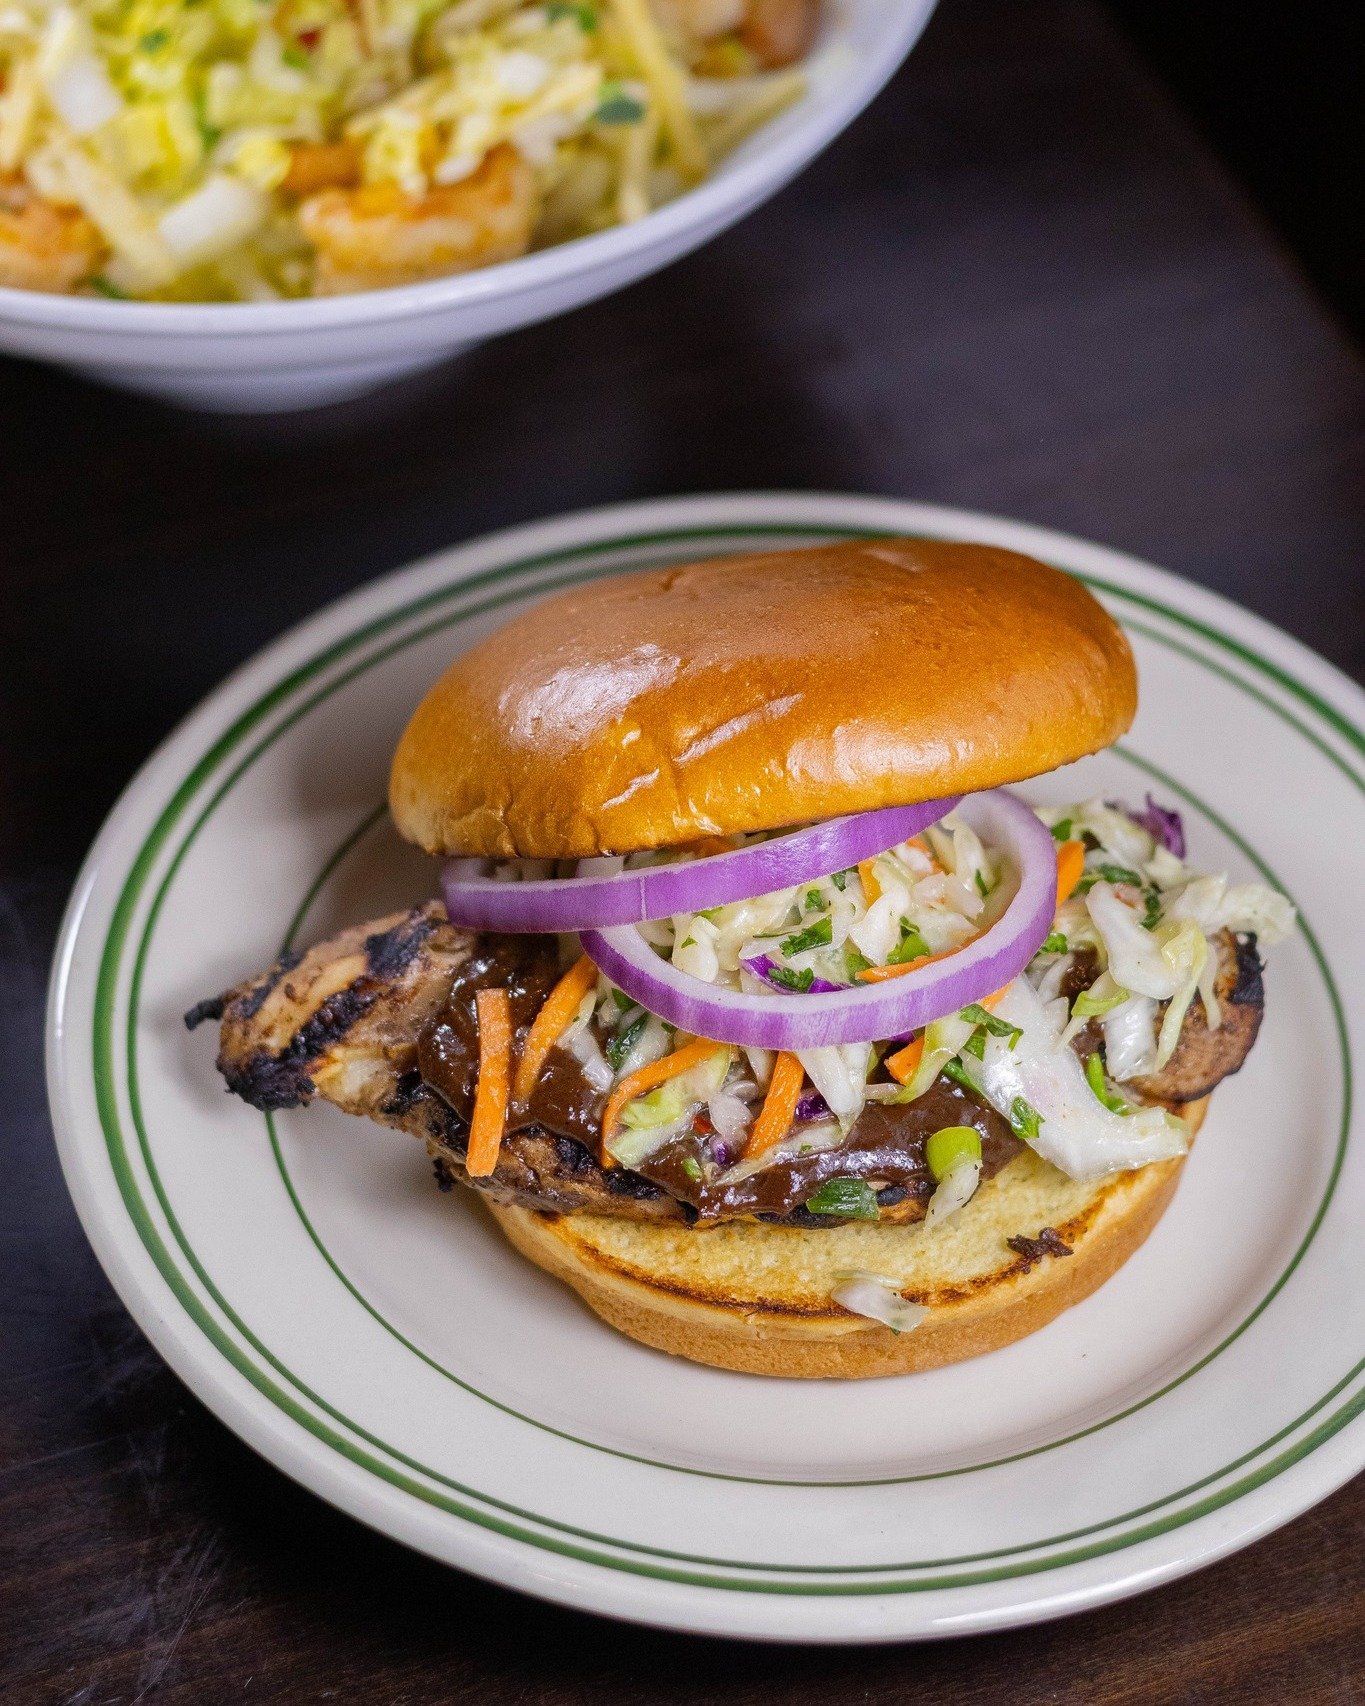 ORDER UP 🛎 New menu is HERE!

We&rsquo;re excited to share some brand new dishes like teriyaki-marinated salmon, a jerk chicken sandwich with ginger slaw, slow-cooked porchetta with giardiniera, gluten-free tempura shrimp, roasted beet salad with ba